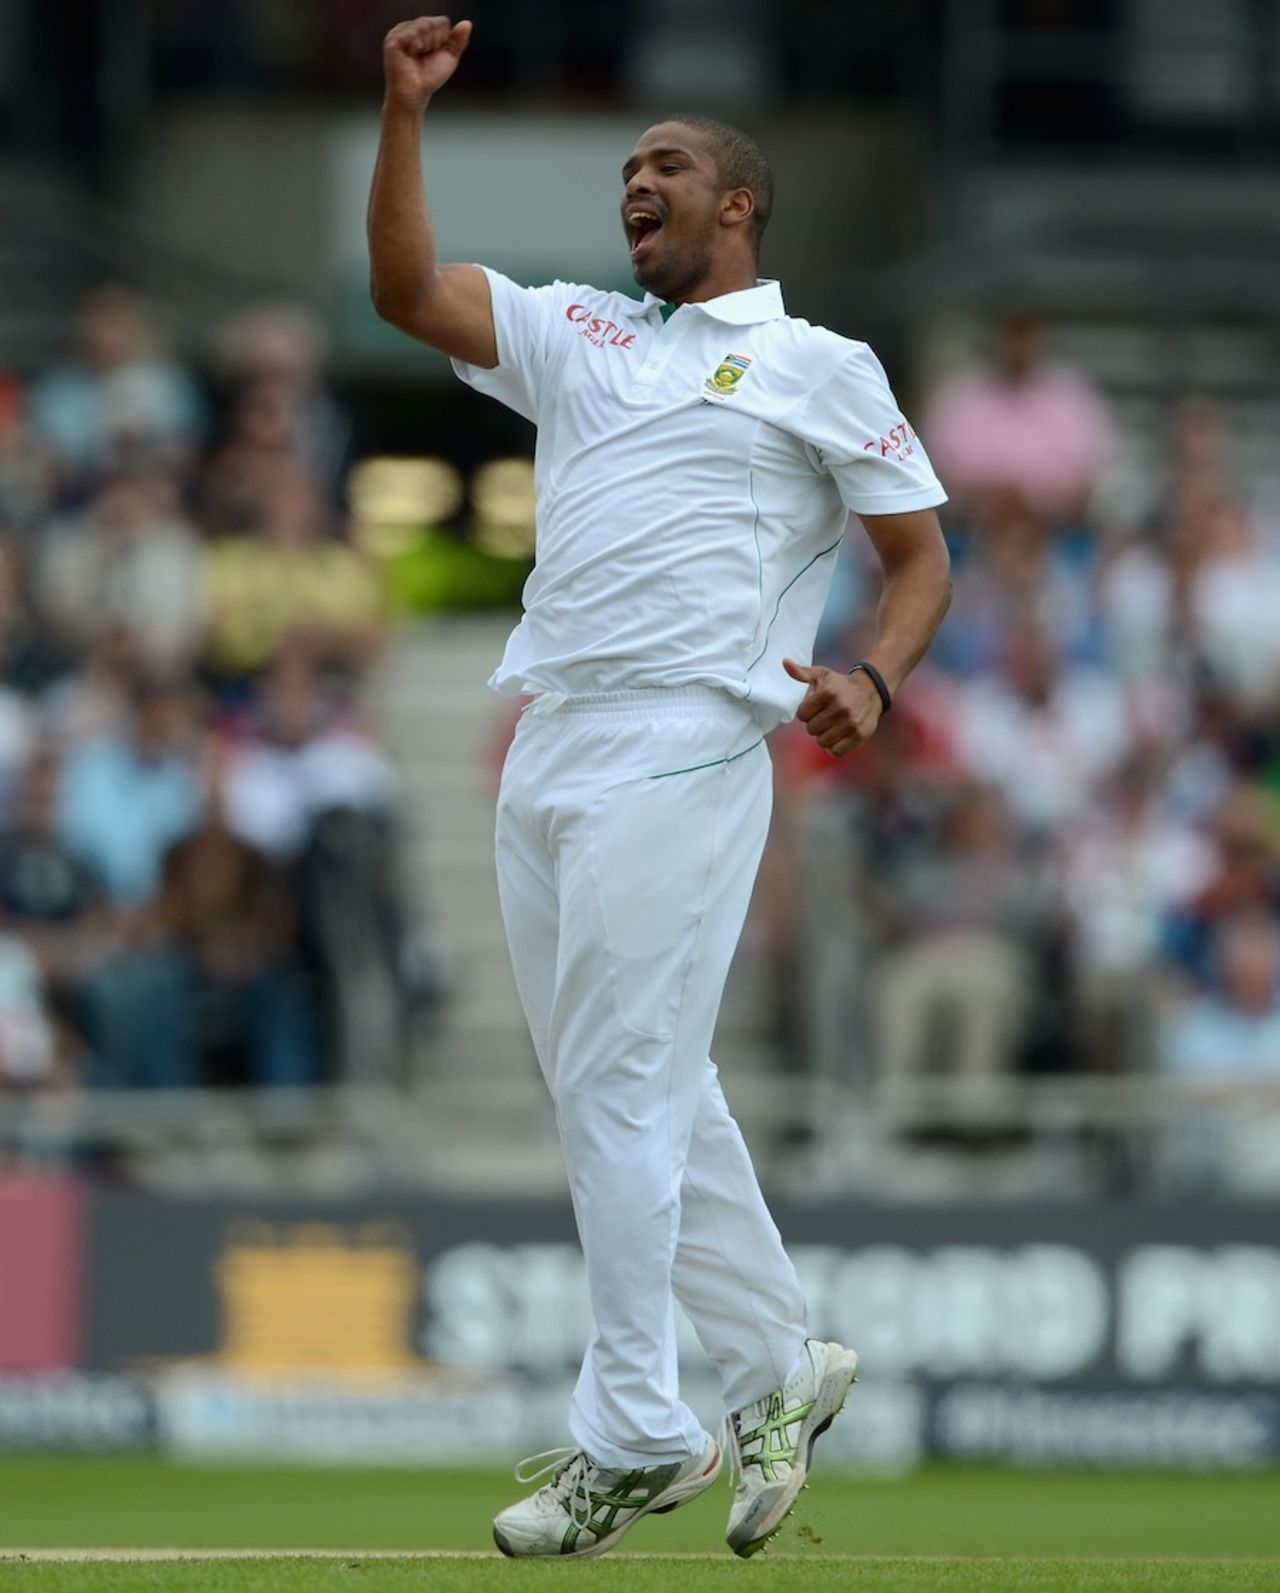 Vernon Philander celebrates Alastair Cook's wicket, 2nd Investec Test, Headingley, 3rd day, August 4, 2012